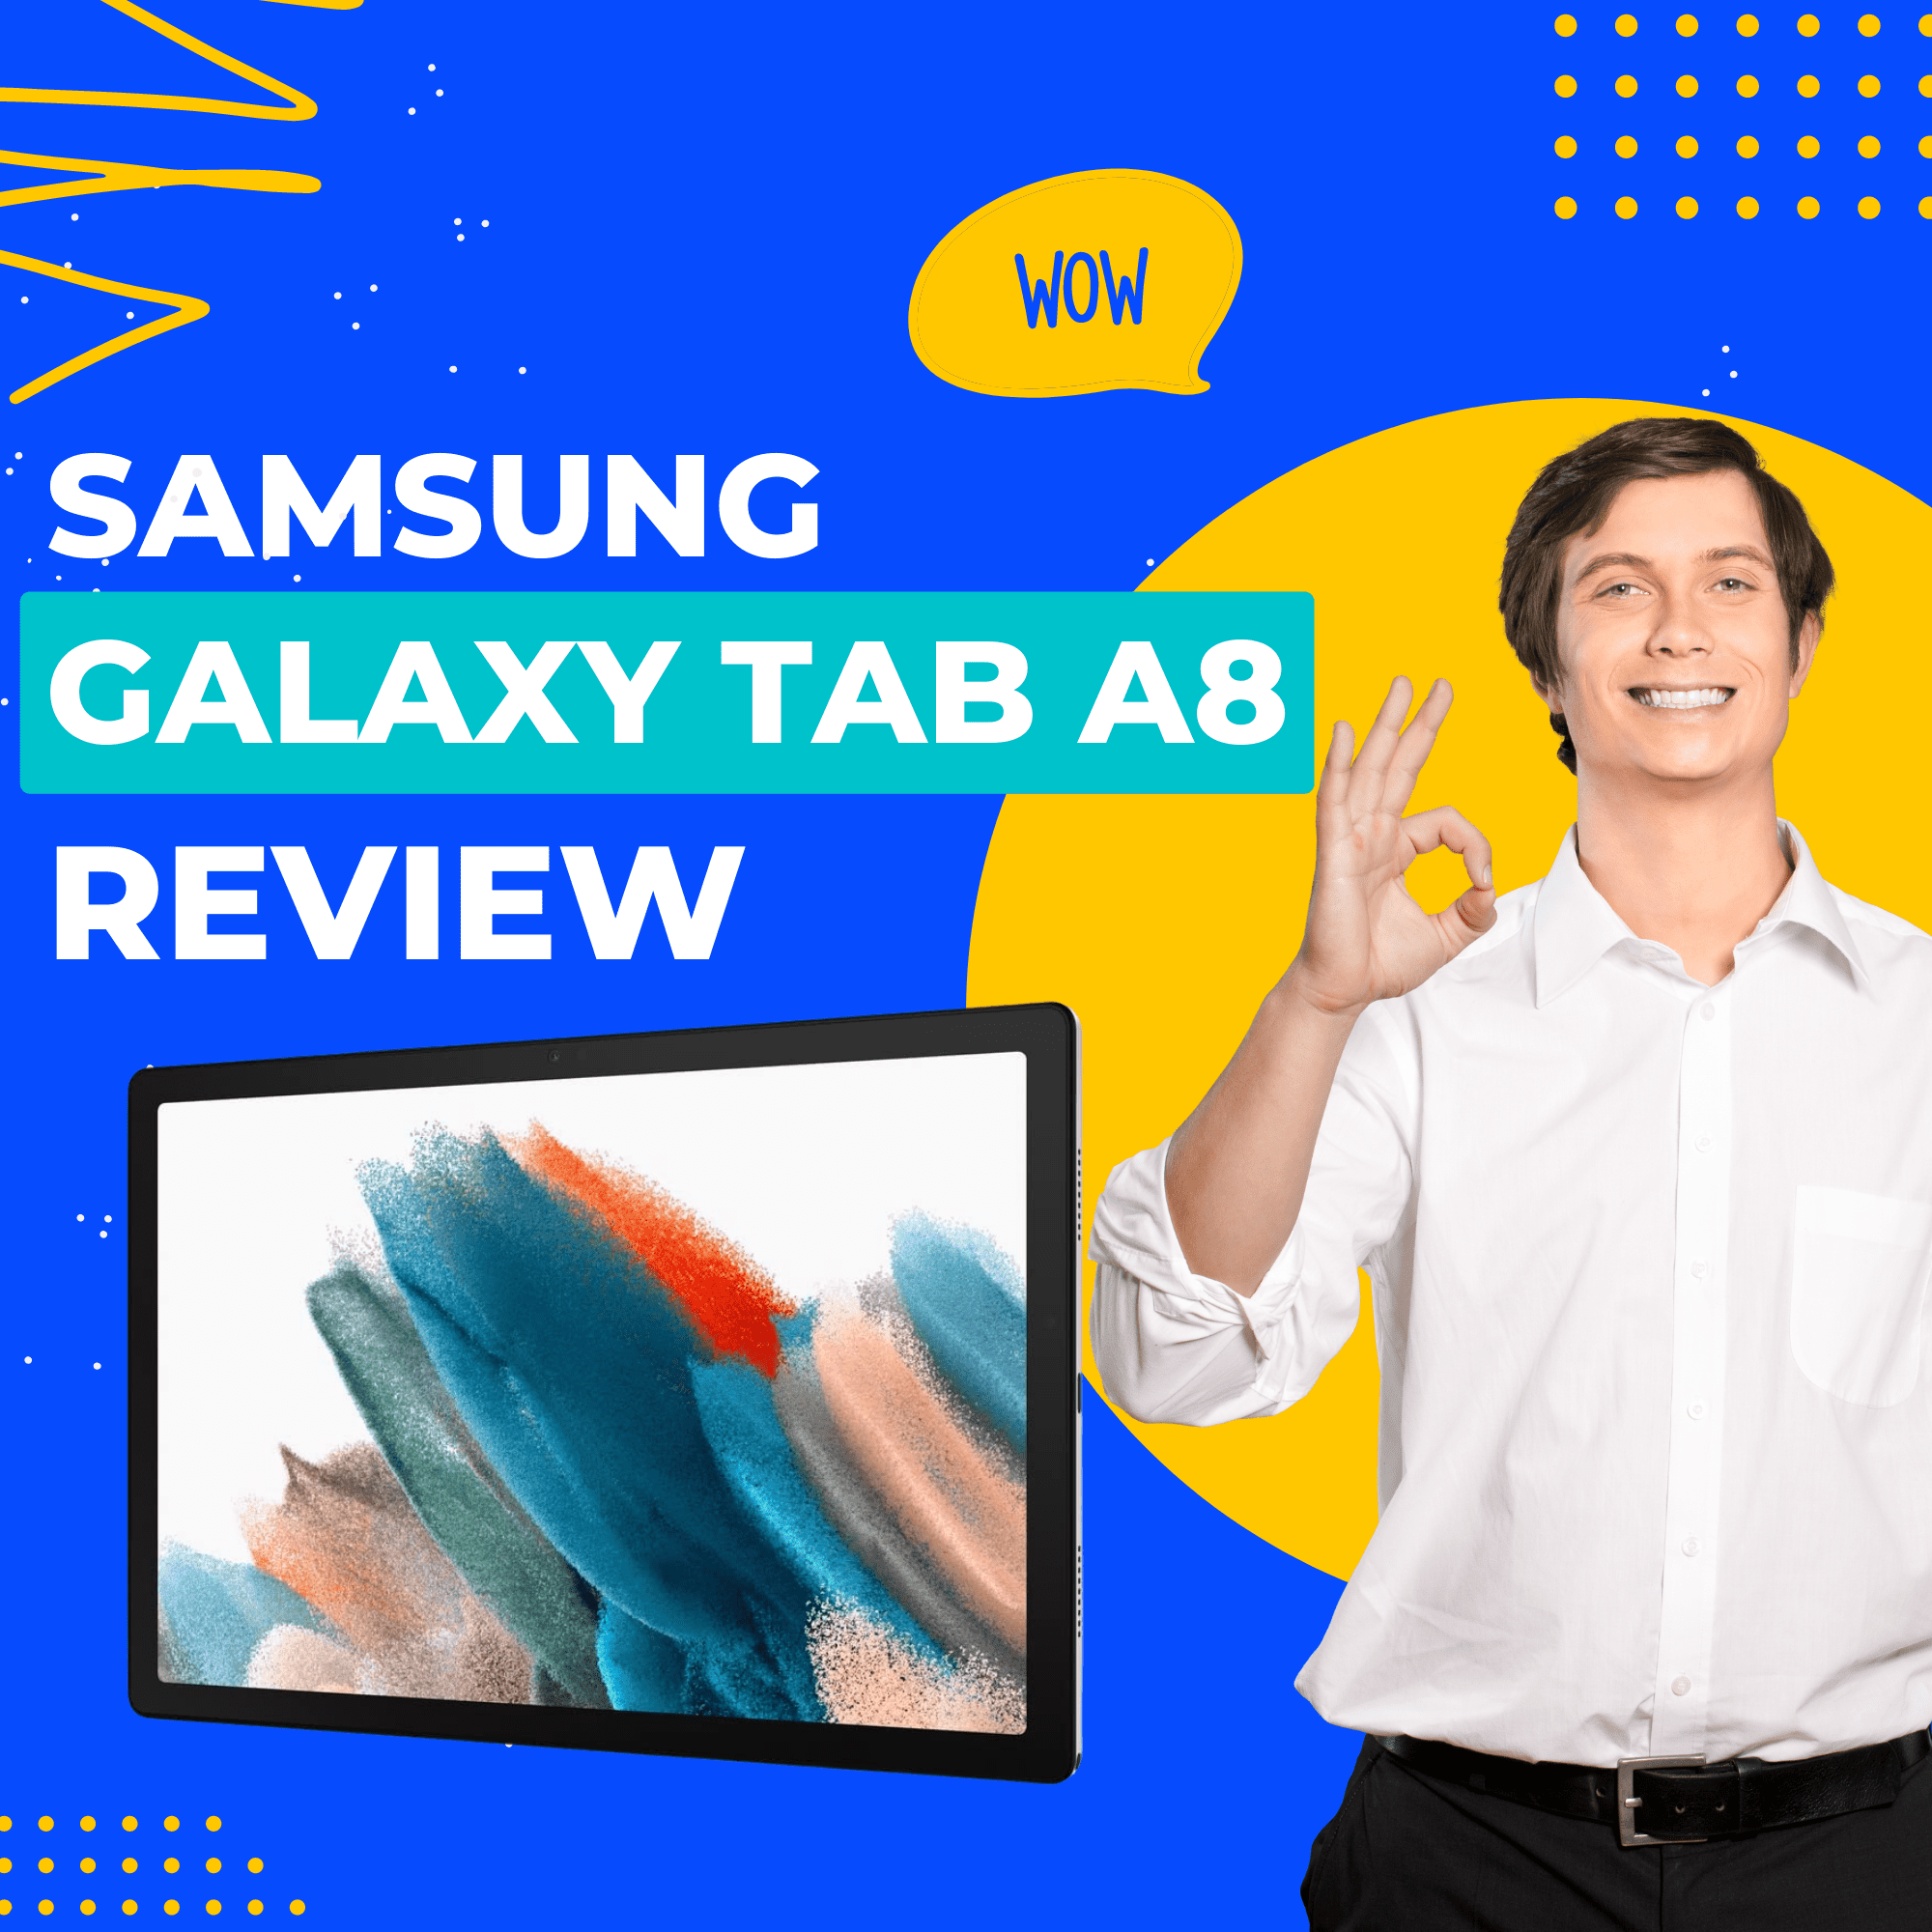 samsung galaxy tab a8 review with pros, cons, specifications, ratings, etc.